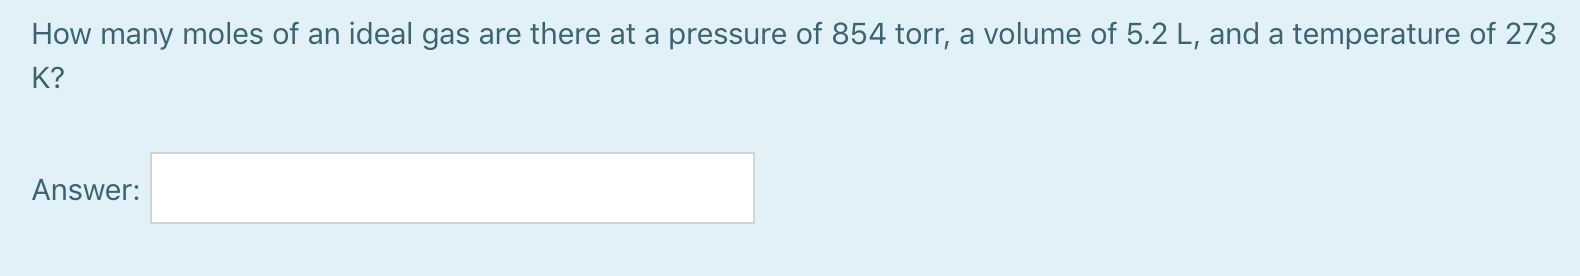 How many moles of an ideal gas are there at a pressure of 854 torr, a volume of 5.2 L, and a temperature of 273
K?
Answer:
